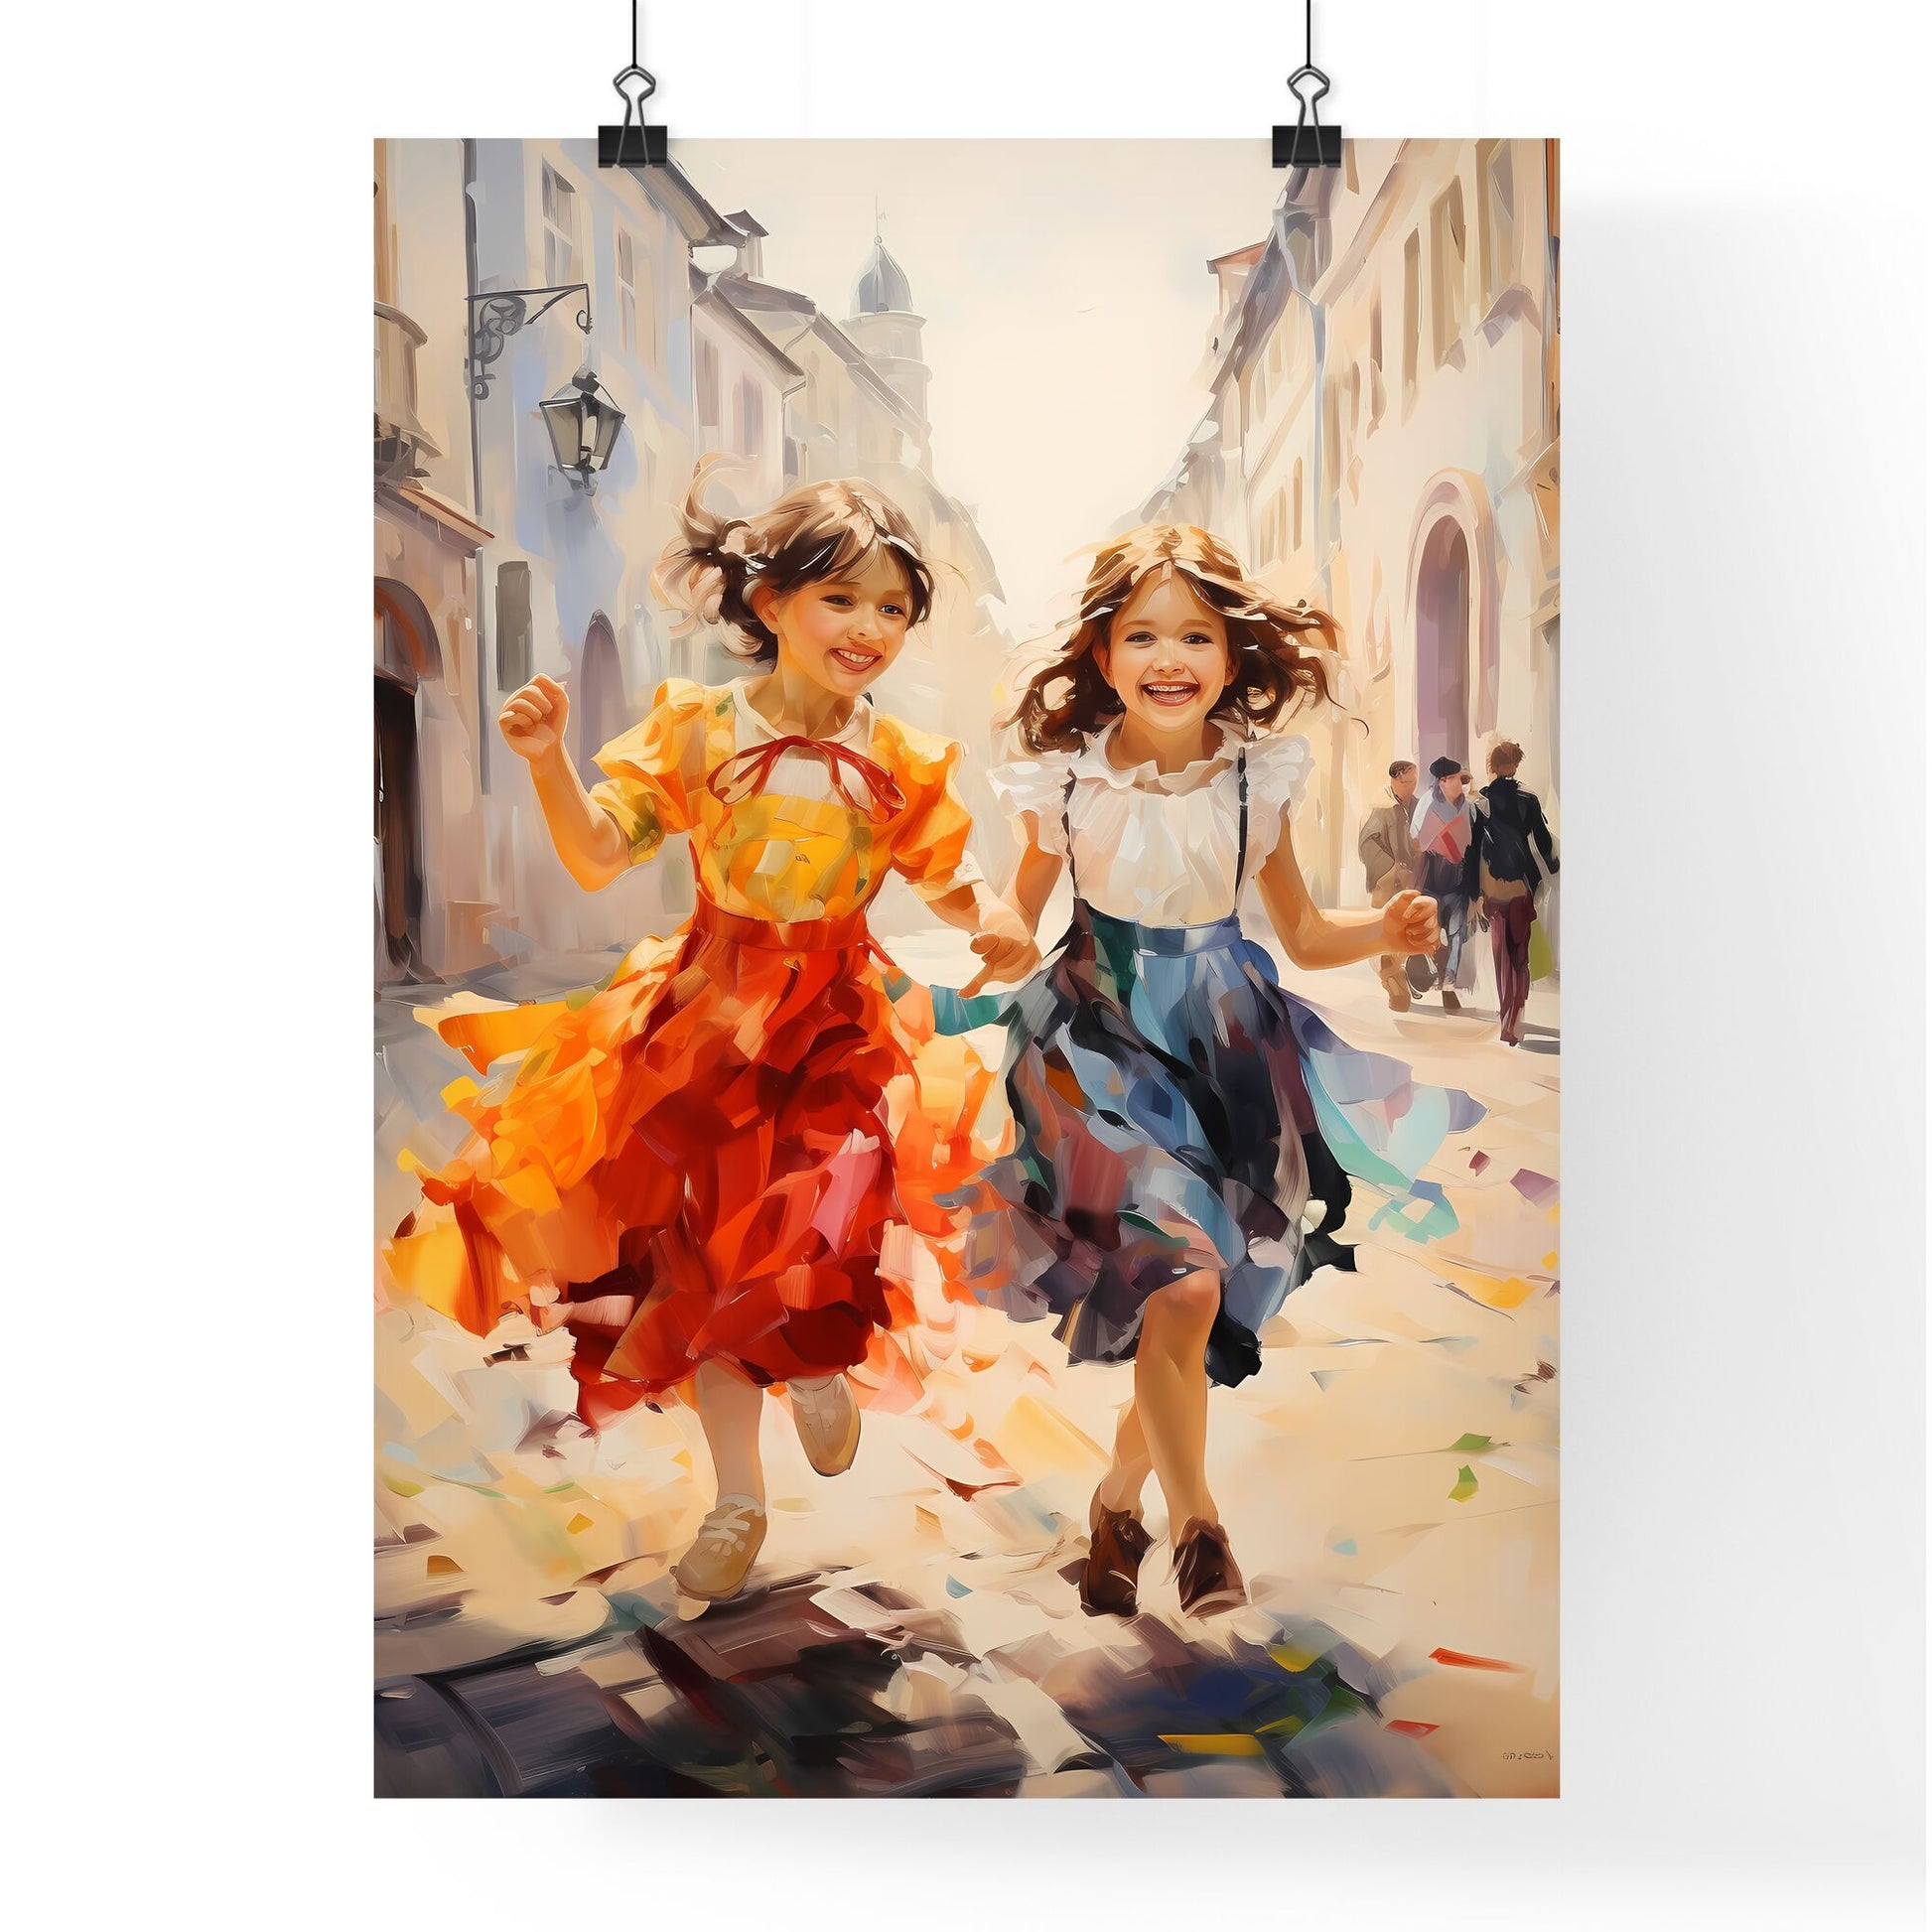 Kids Playing In Berlin - A Painting Of Two Girls Running On A Street Default Title